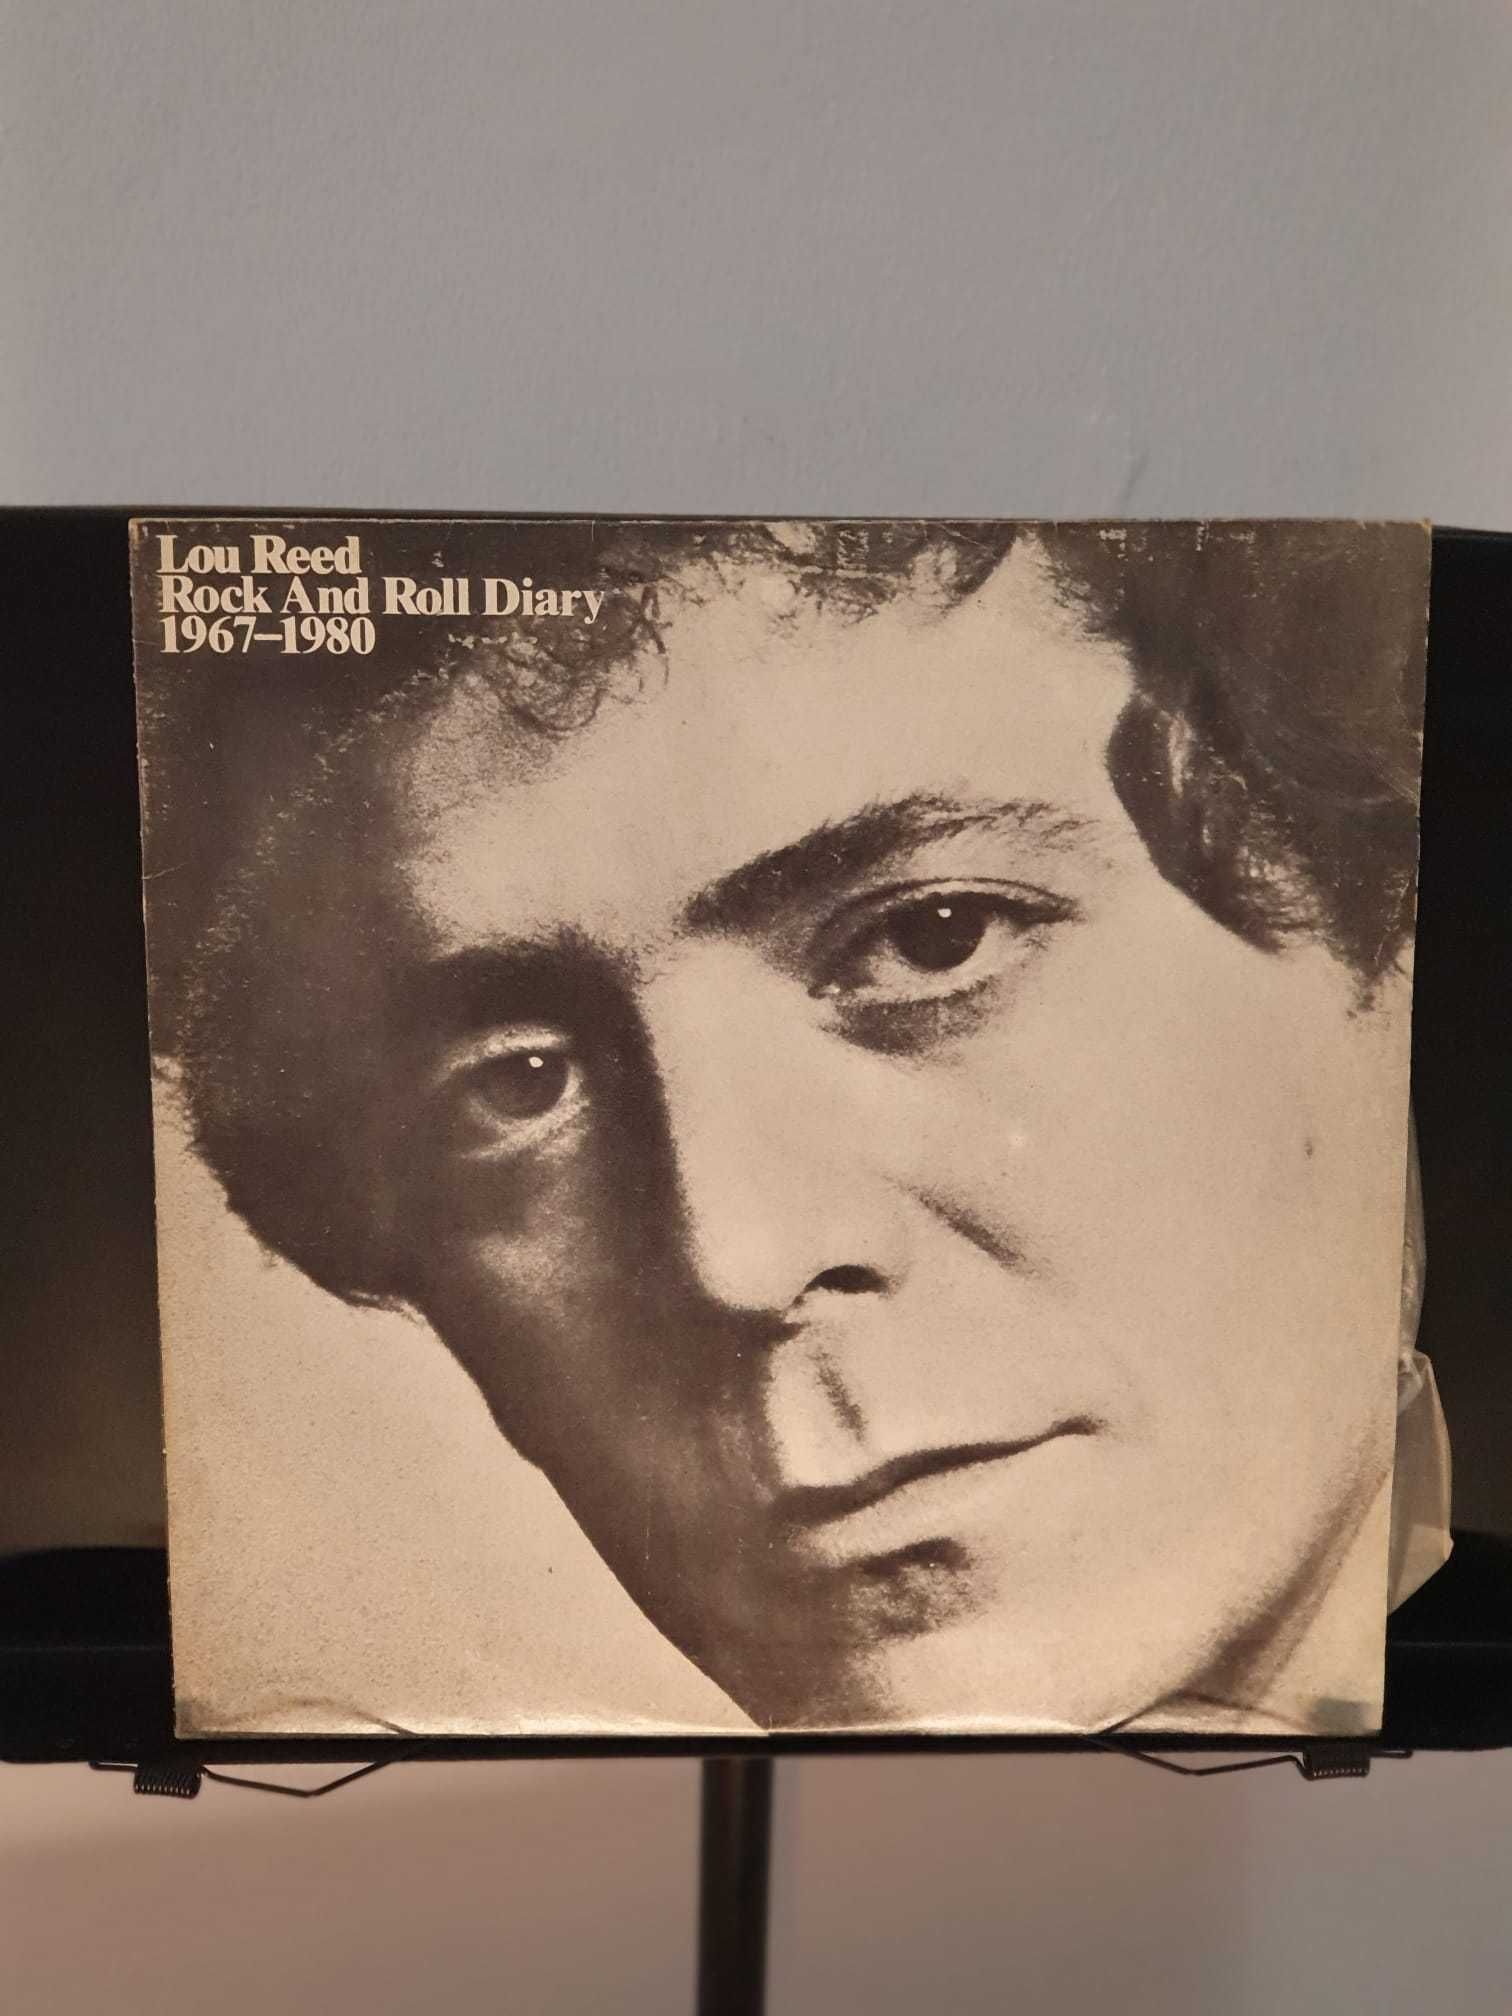 Vinil LP - Lou Reed - Rock and Roll Diary